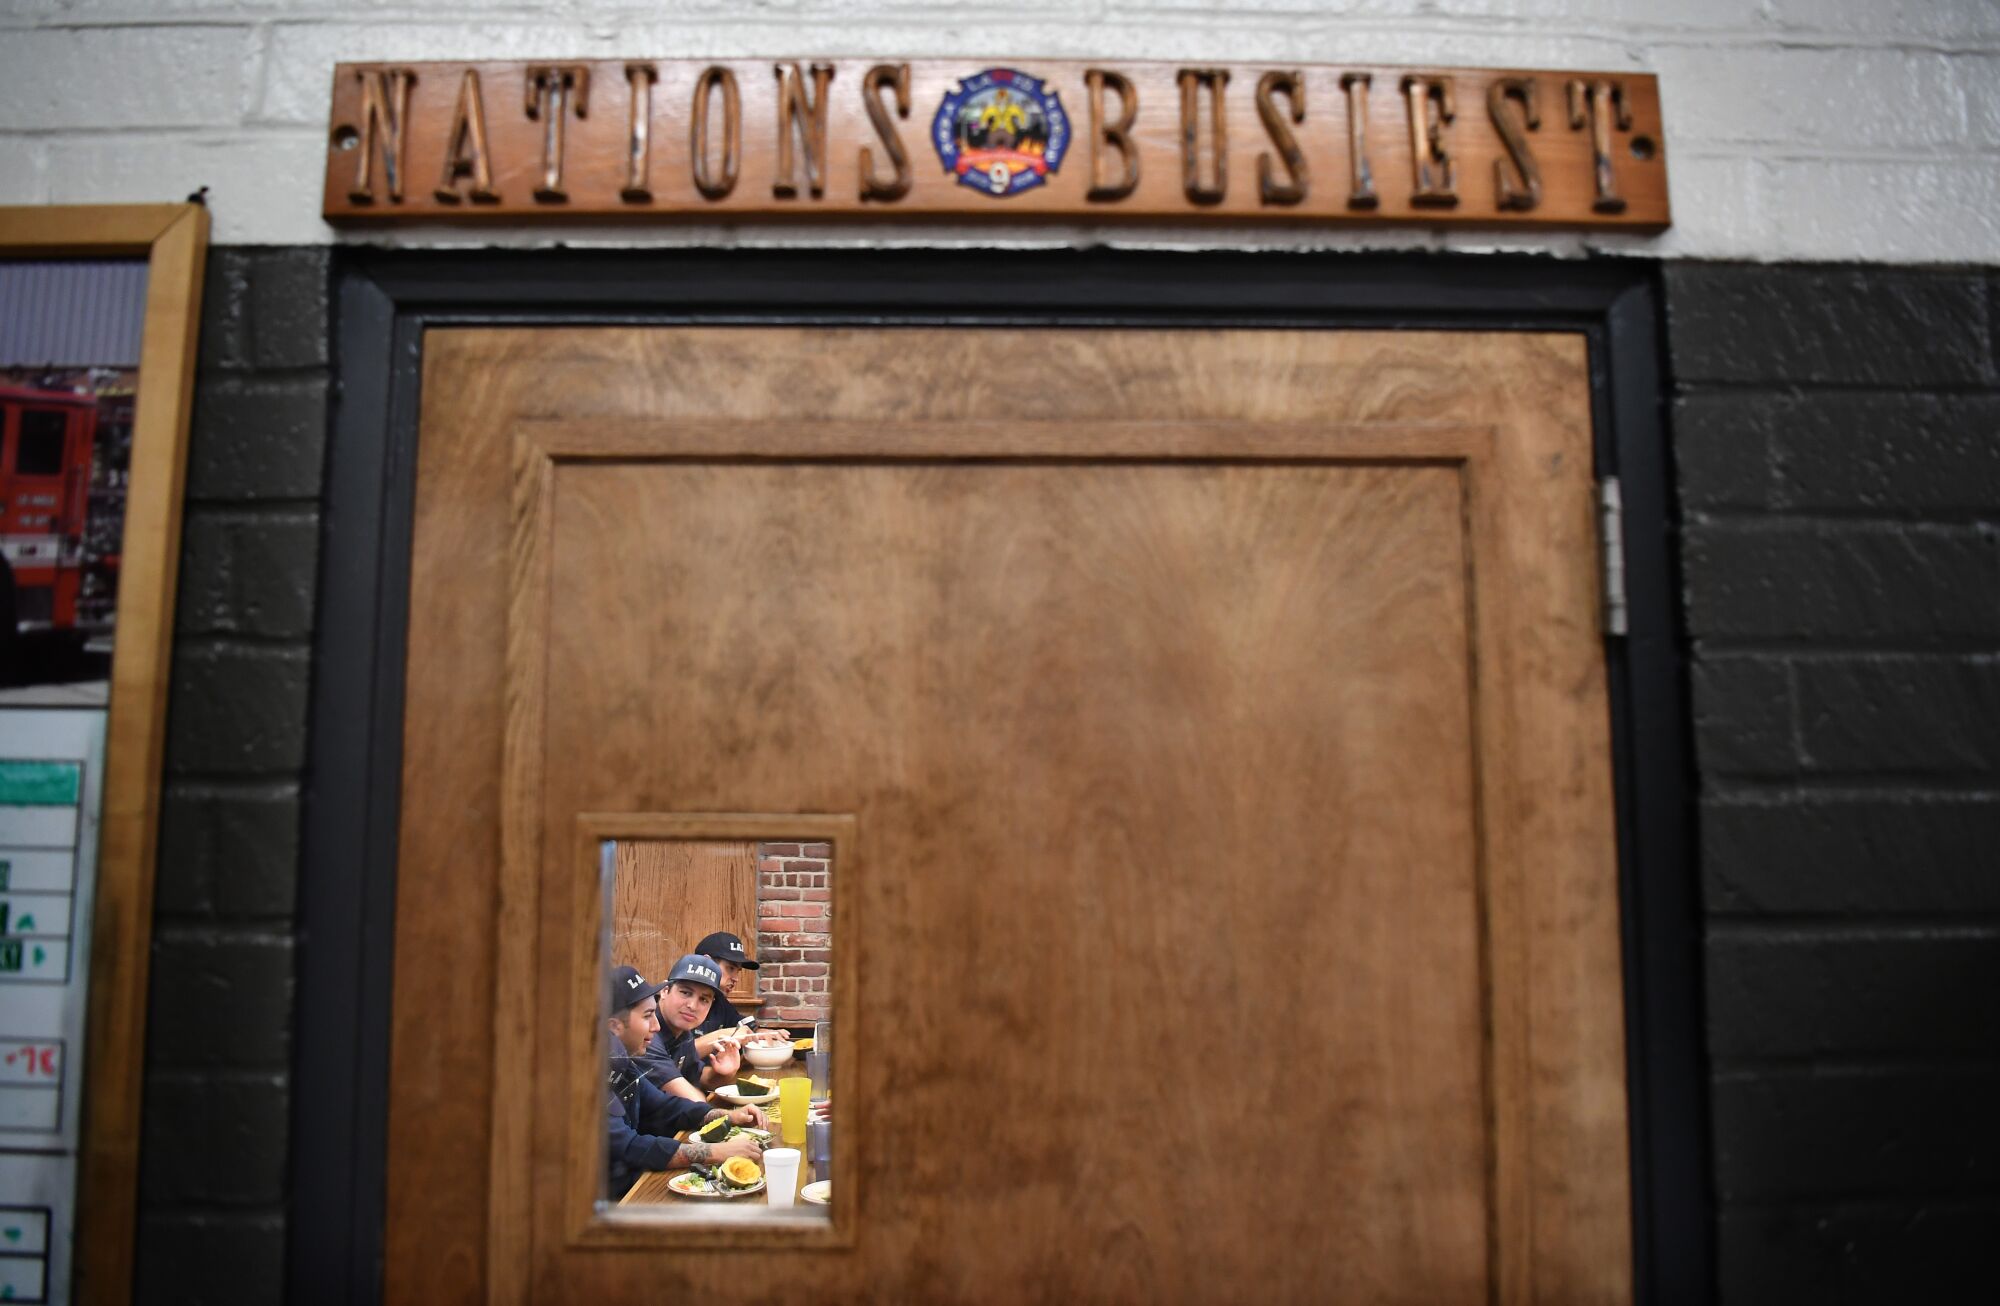 Los Angeles firefighters eat a meal at Fire Station No. 9